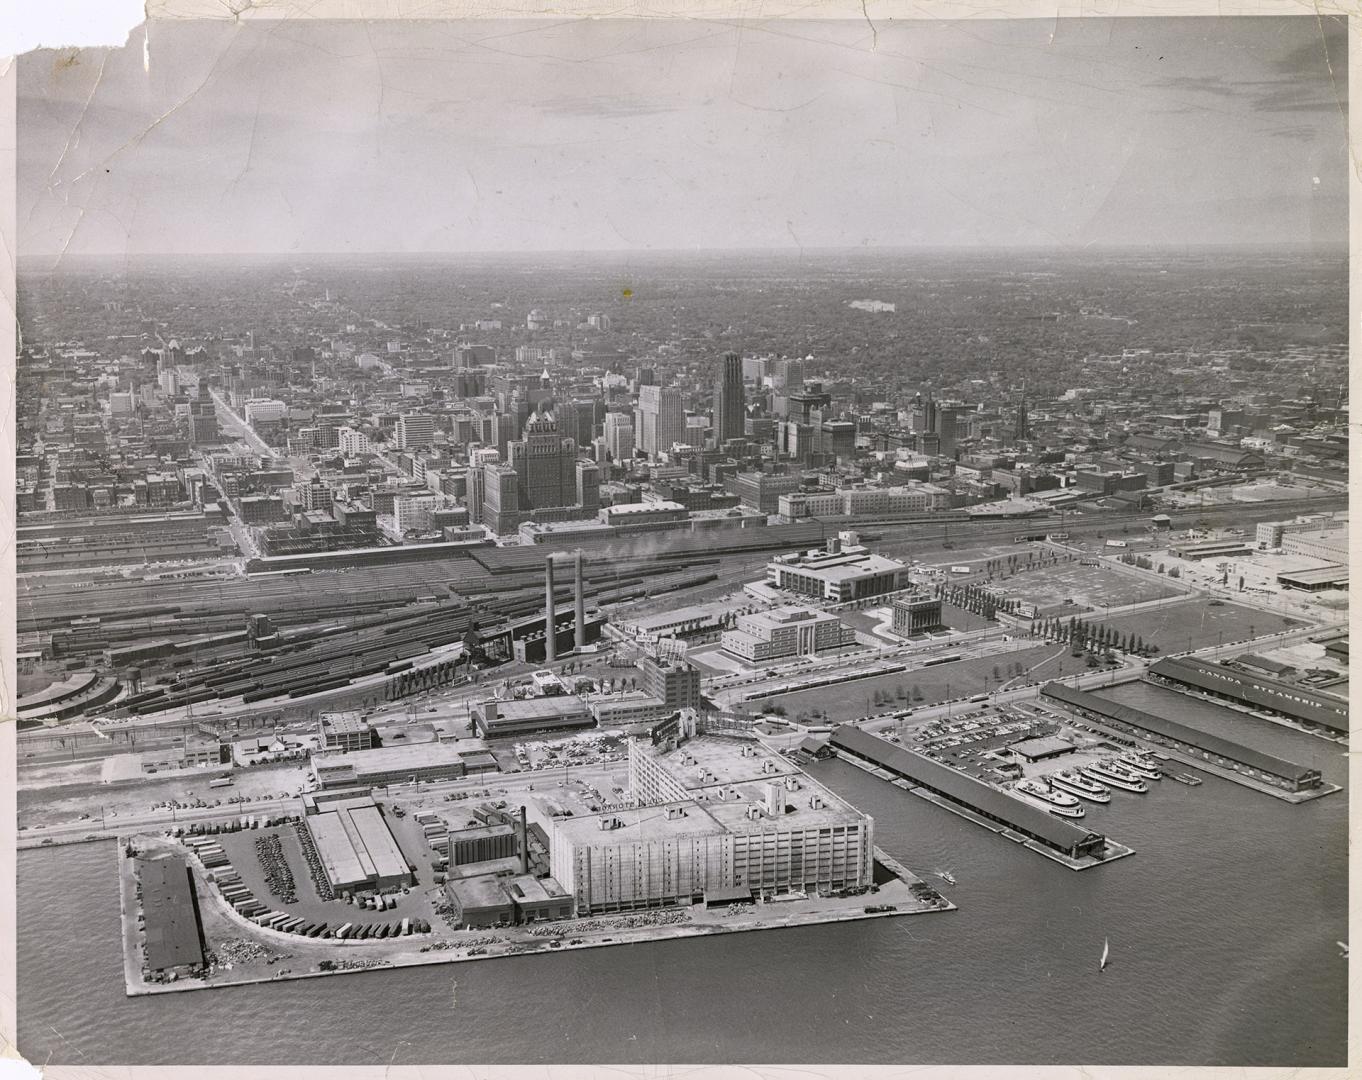 Image shows an aerial view of the Harbour buildings and further on into the city.